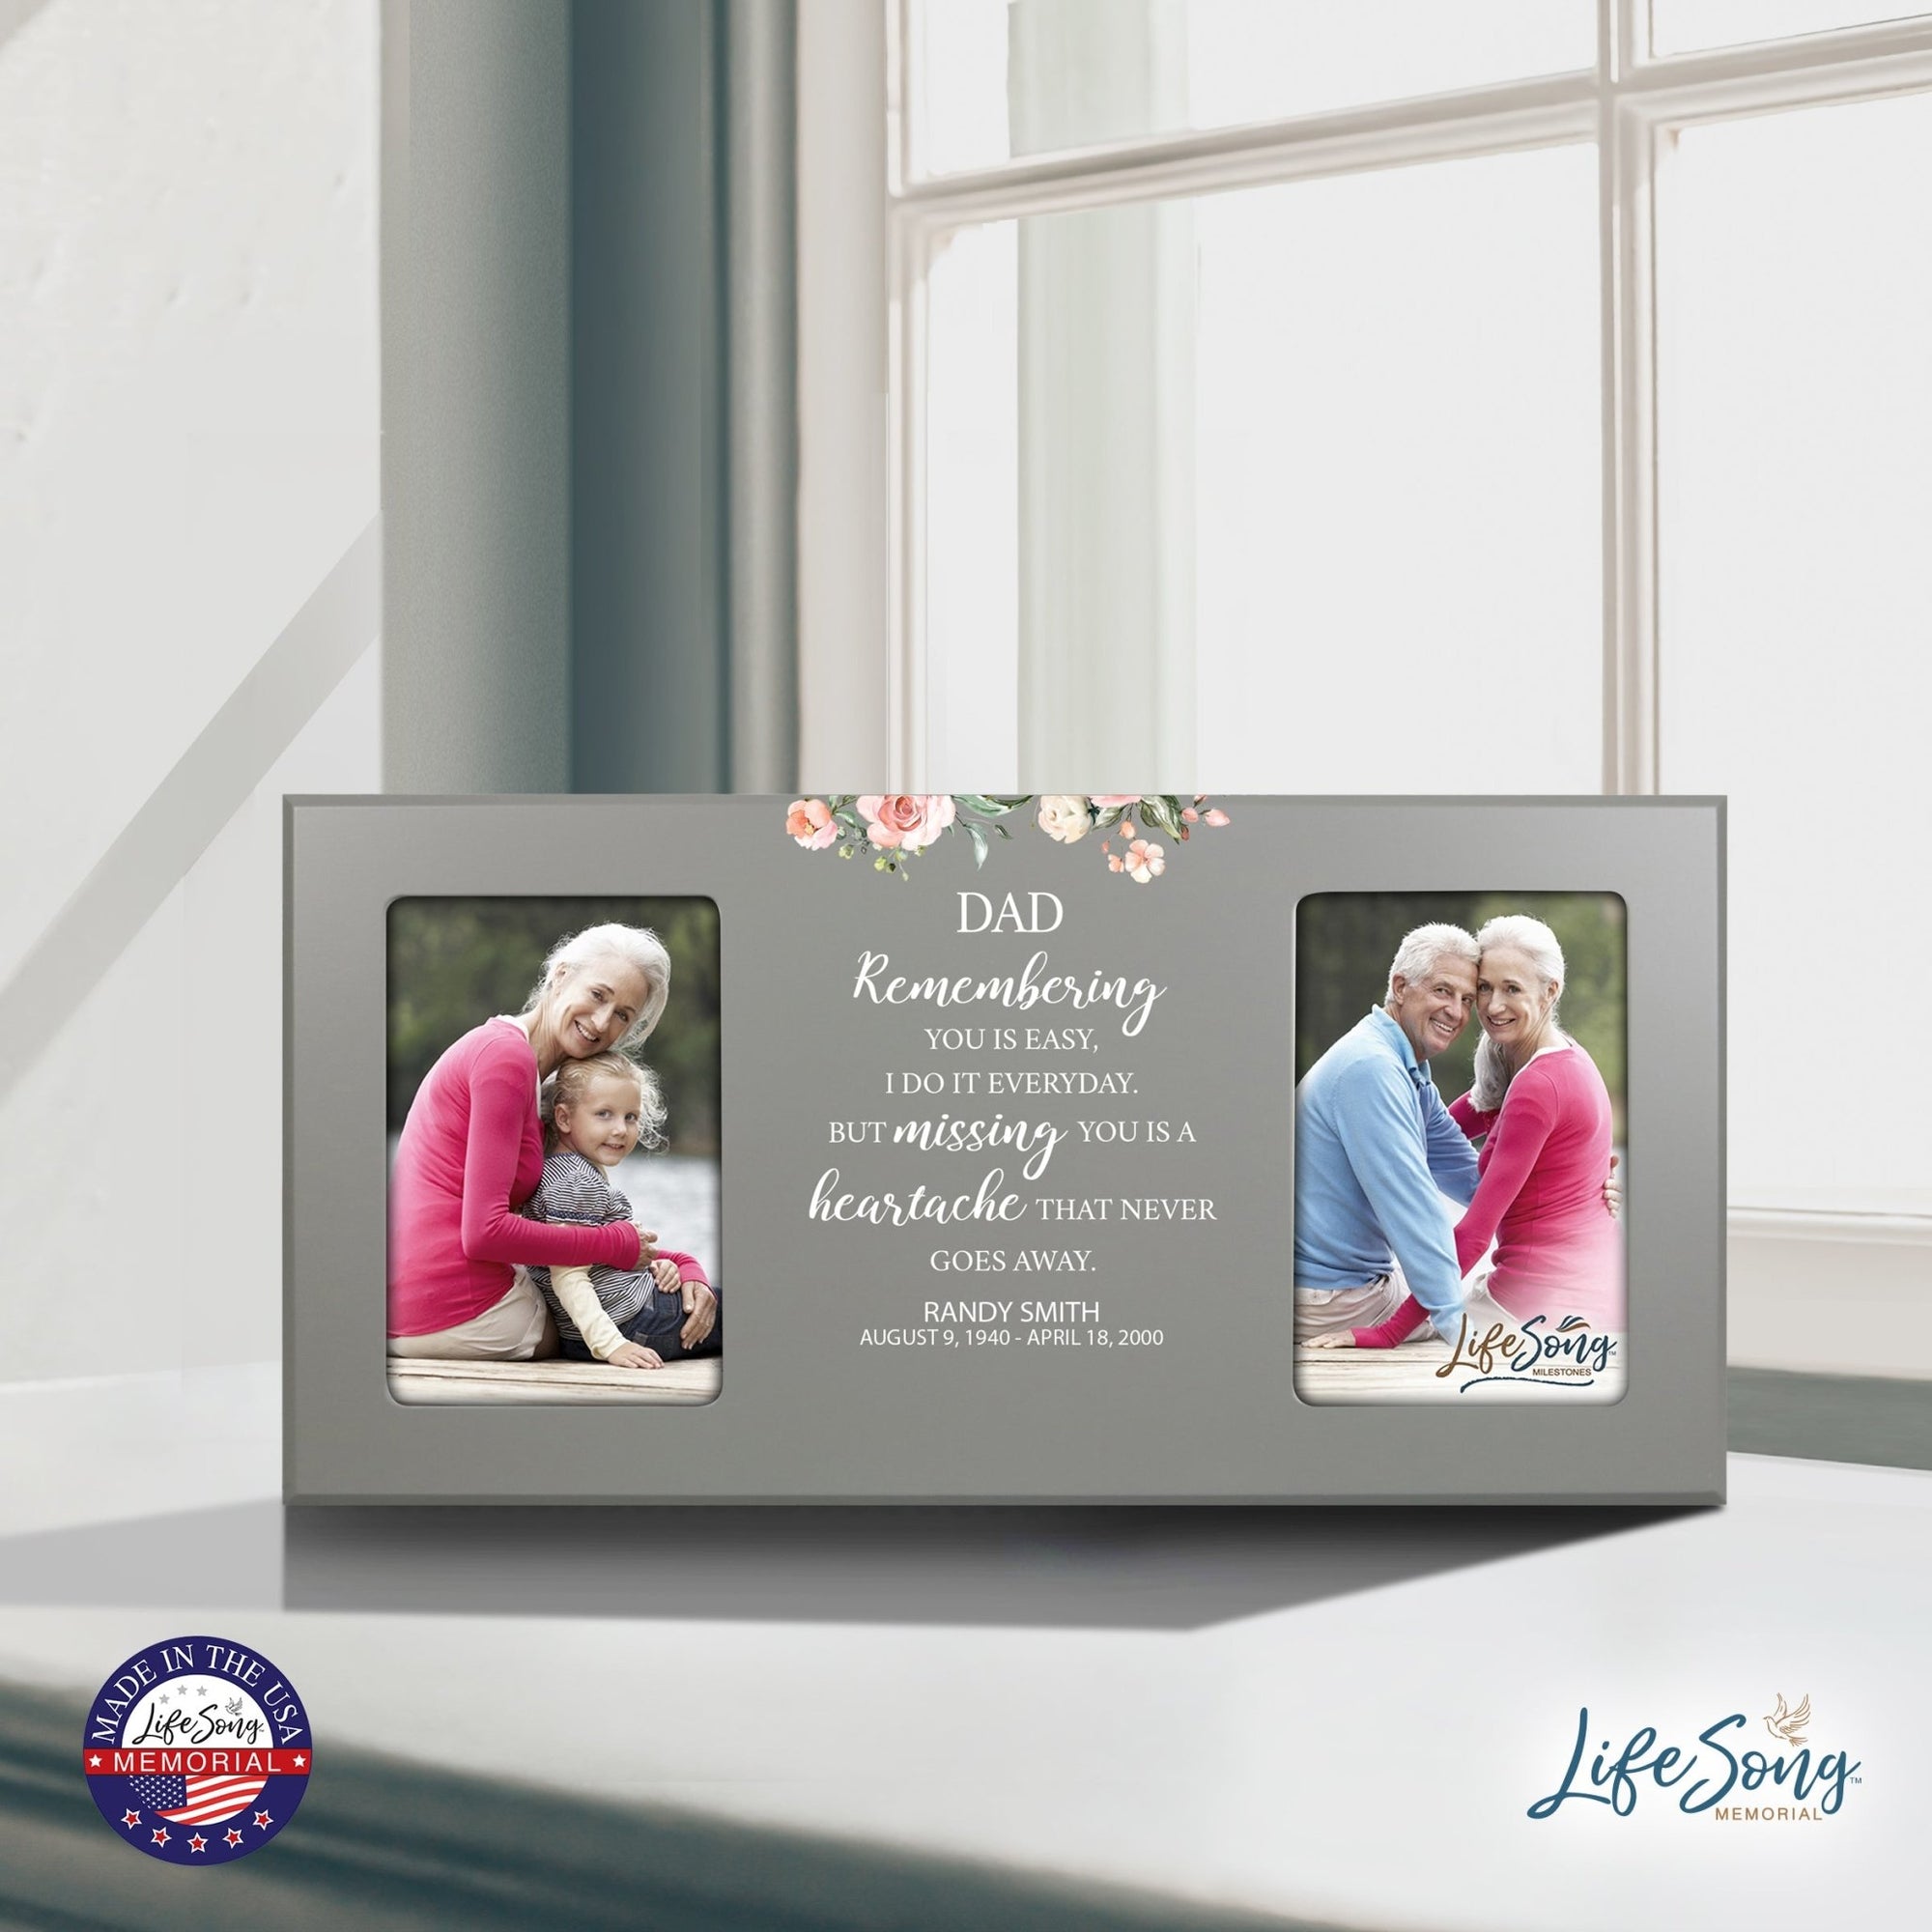 Custom Memorial Picture Frame 16x8in Holds Two 4x6in Photos - Dad, Remembering You Is Easy - LifeSong Milestones